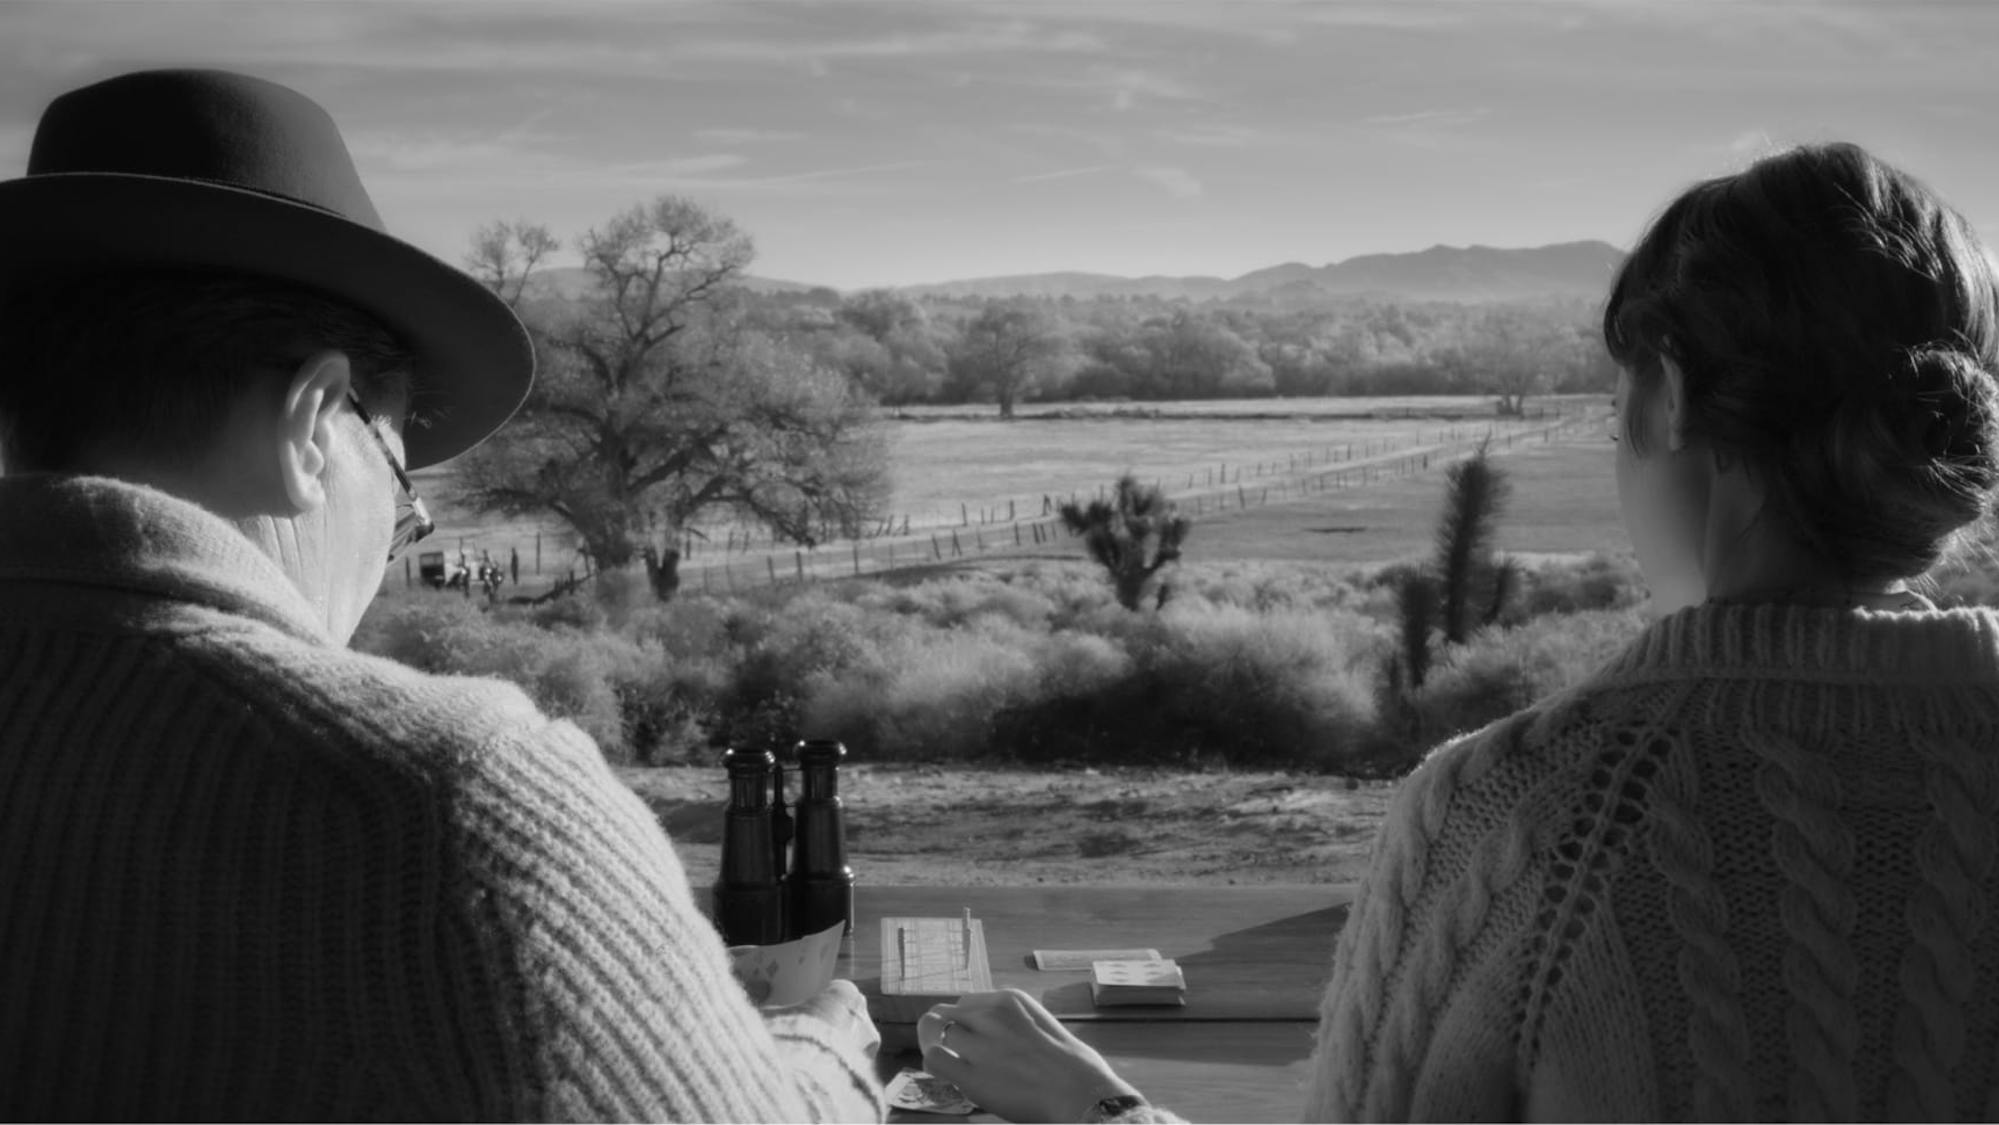 In a shot from the film, we see how the scene above translates to a black-and-white experience. The dusky landscape is a study in grays, and the textures of Oldman’s and Collins’s cable-knit sweaters jump from the screen.